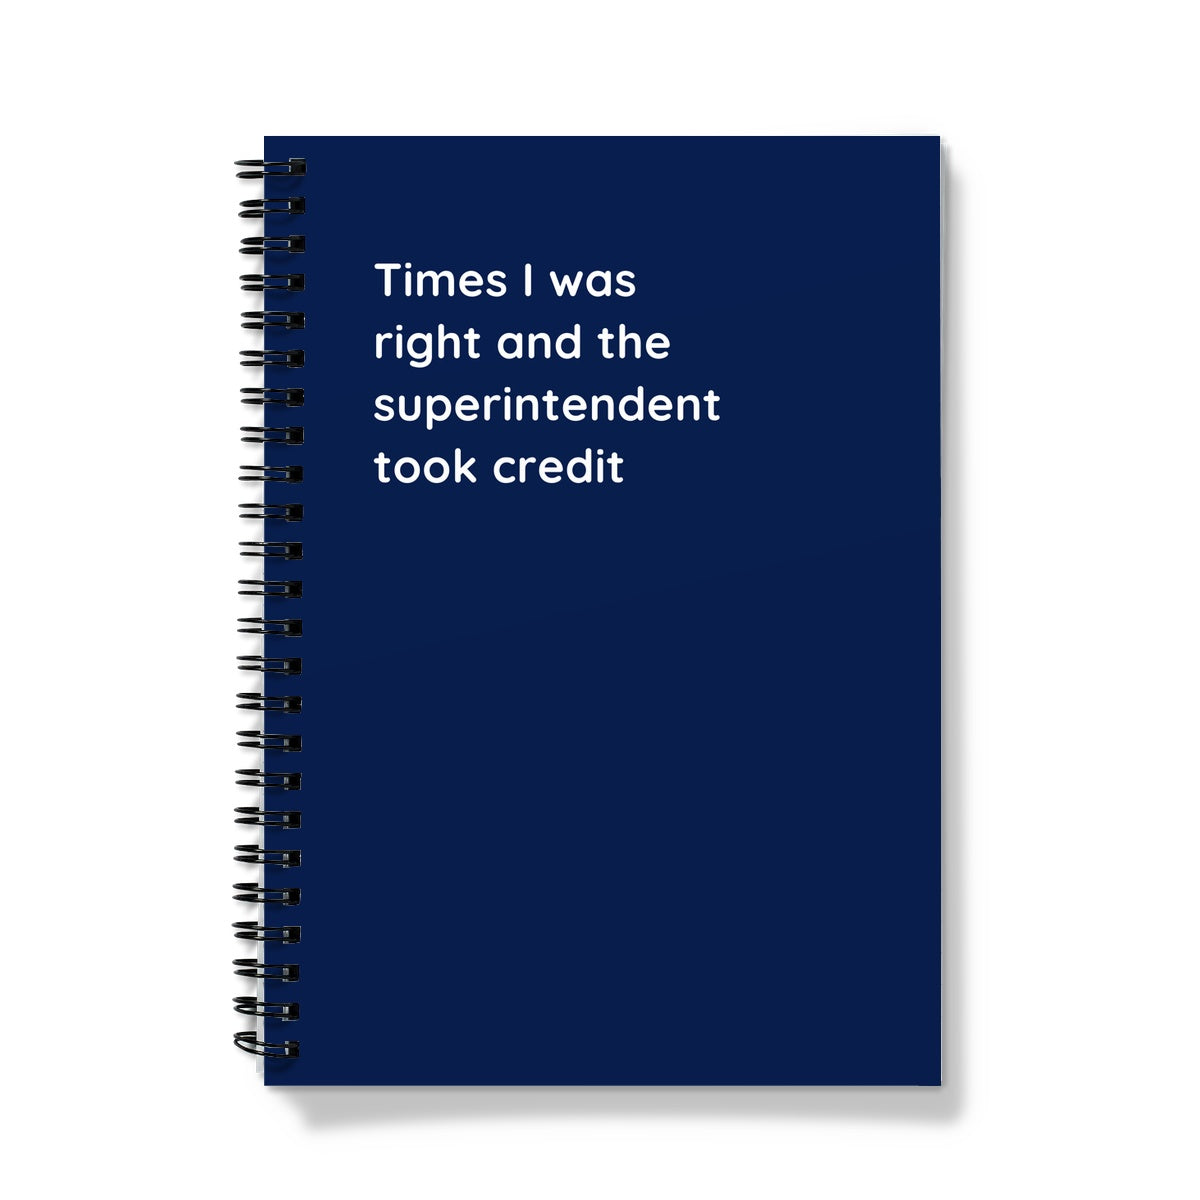 Softcover Notebook (Times I was right and the superintendent took credit)